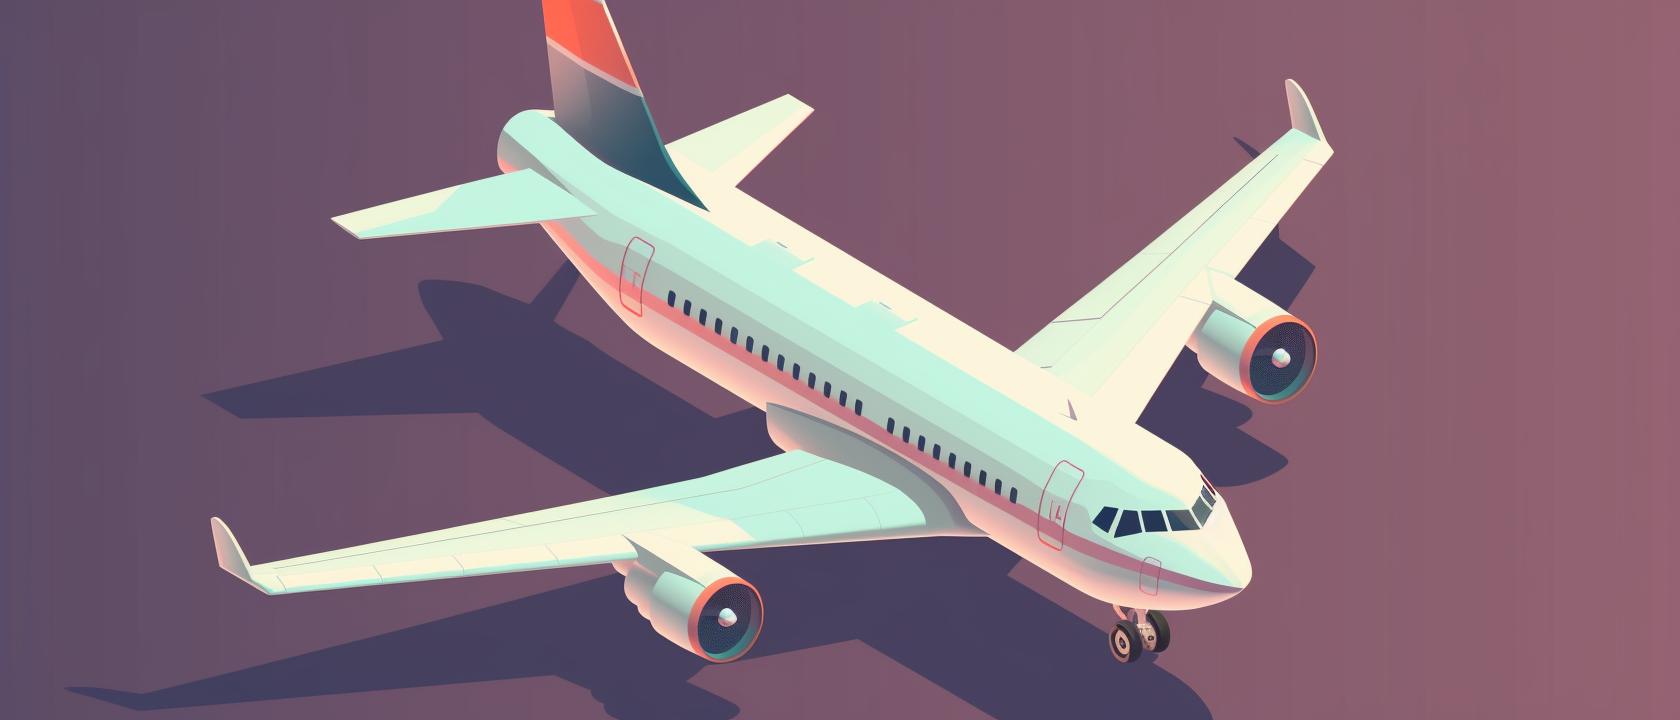 Illustration of an Airplane